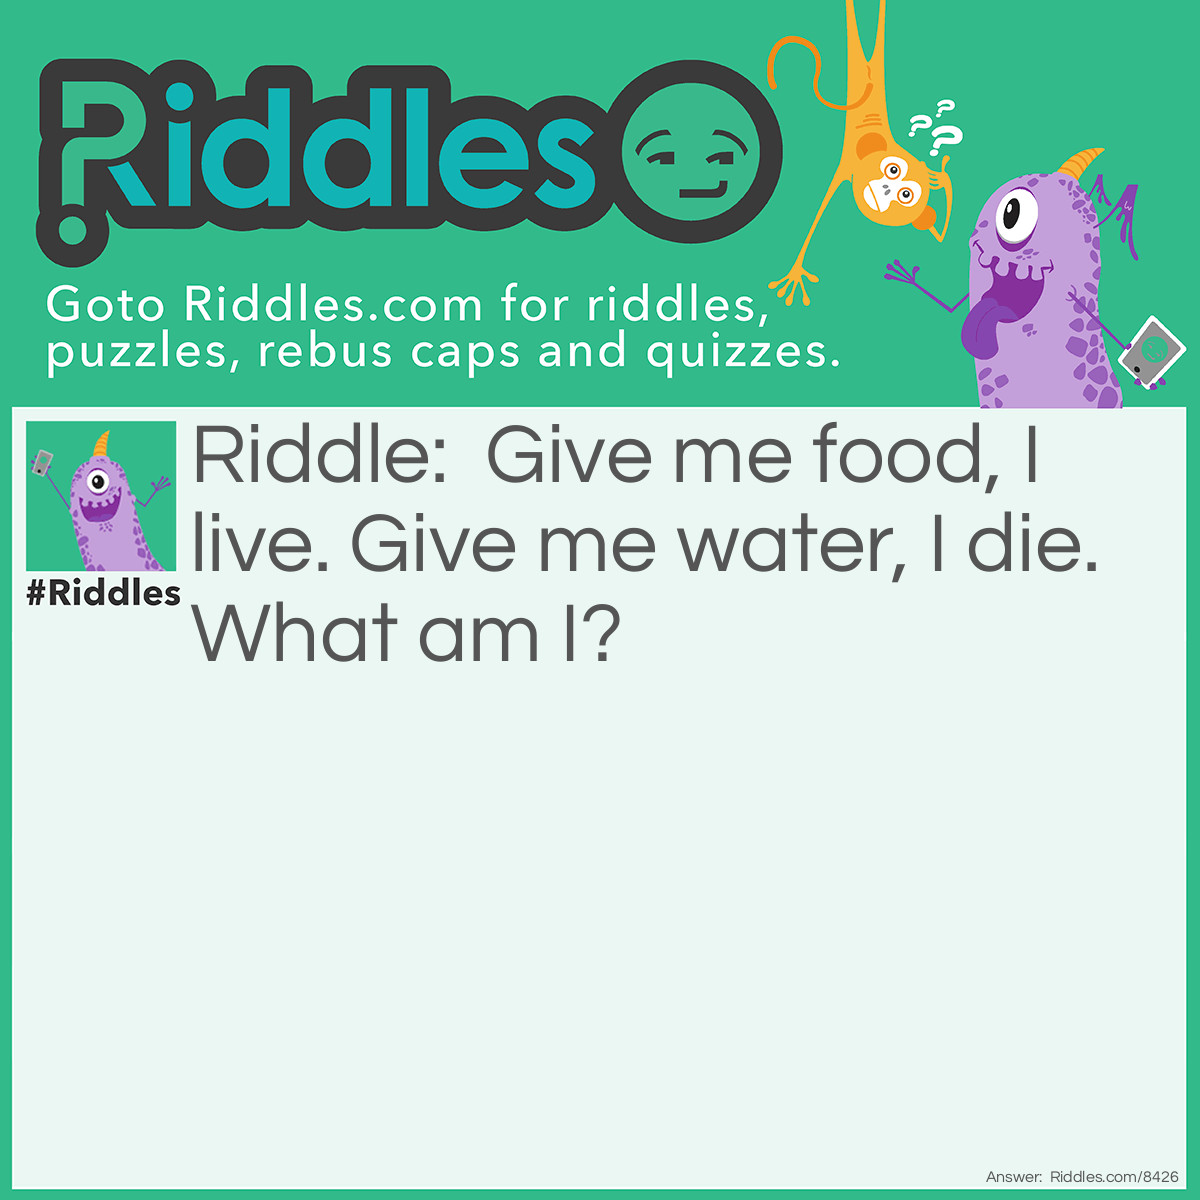 Riddle: Give me food, I live. Give me water, I die. What am I? Answer: Fire.